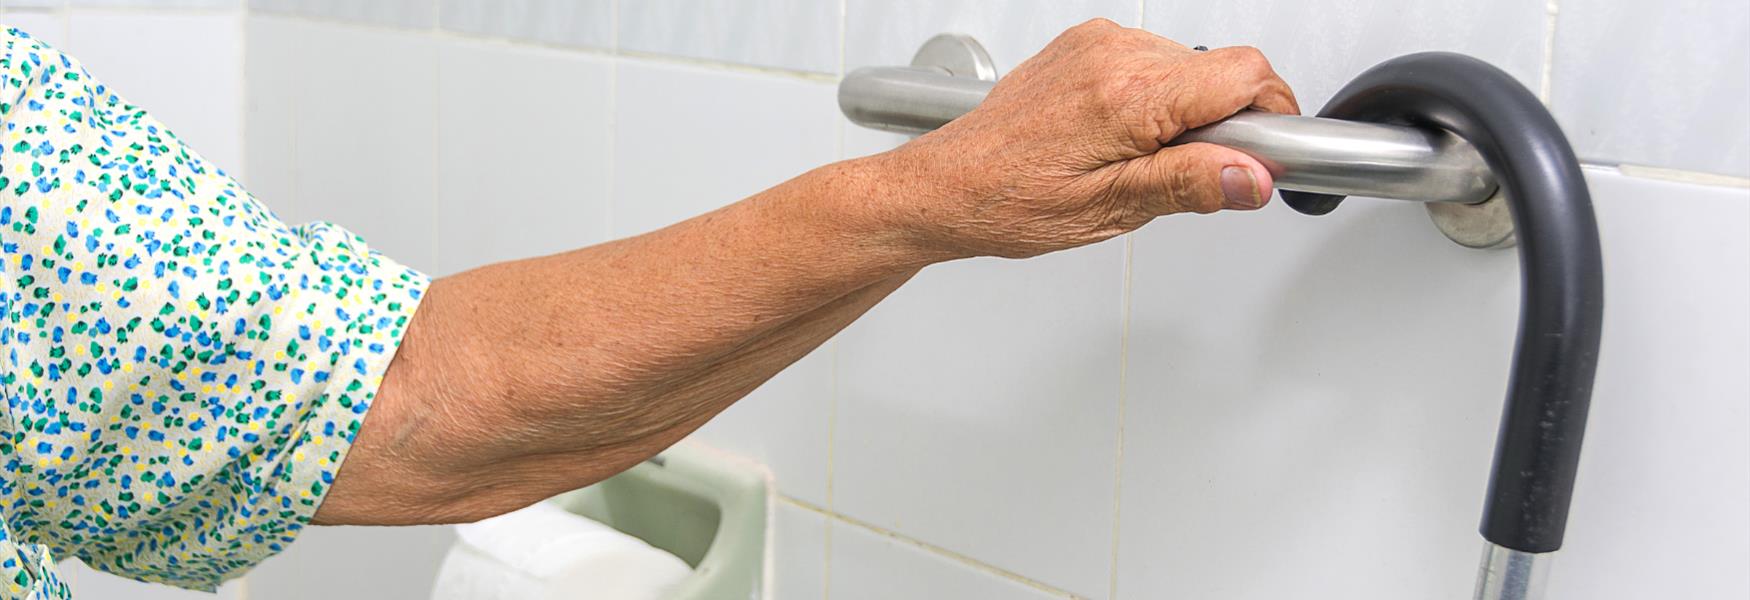 Image of arm holding a grab rail in toilet